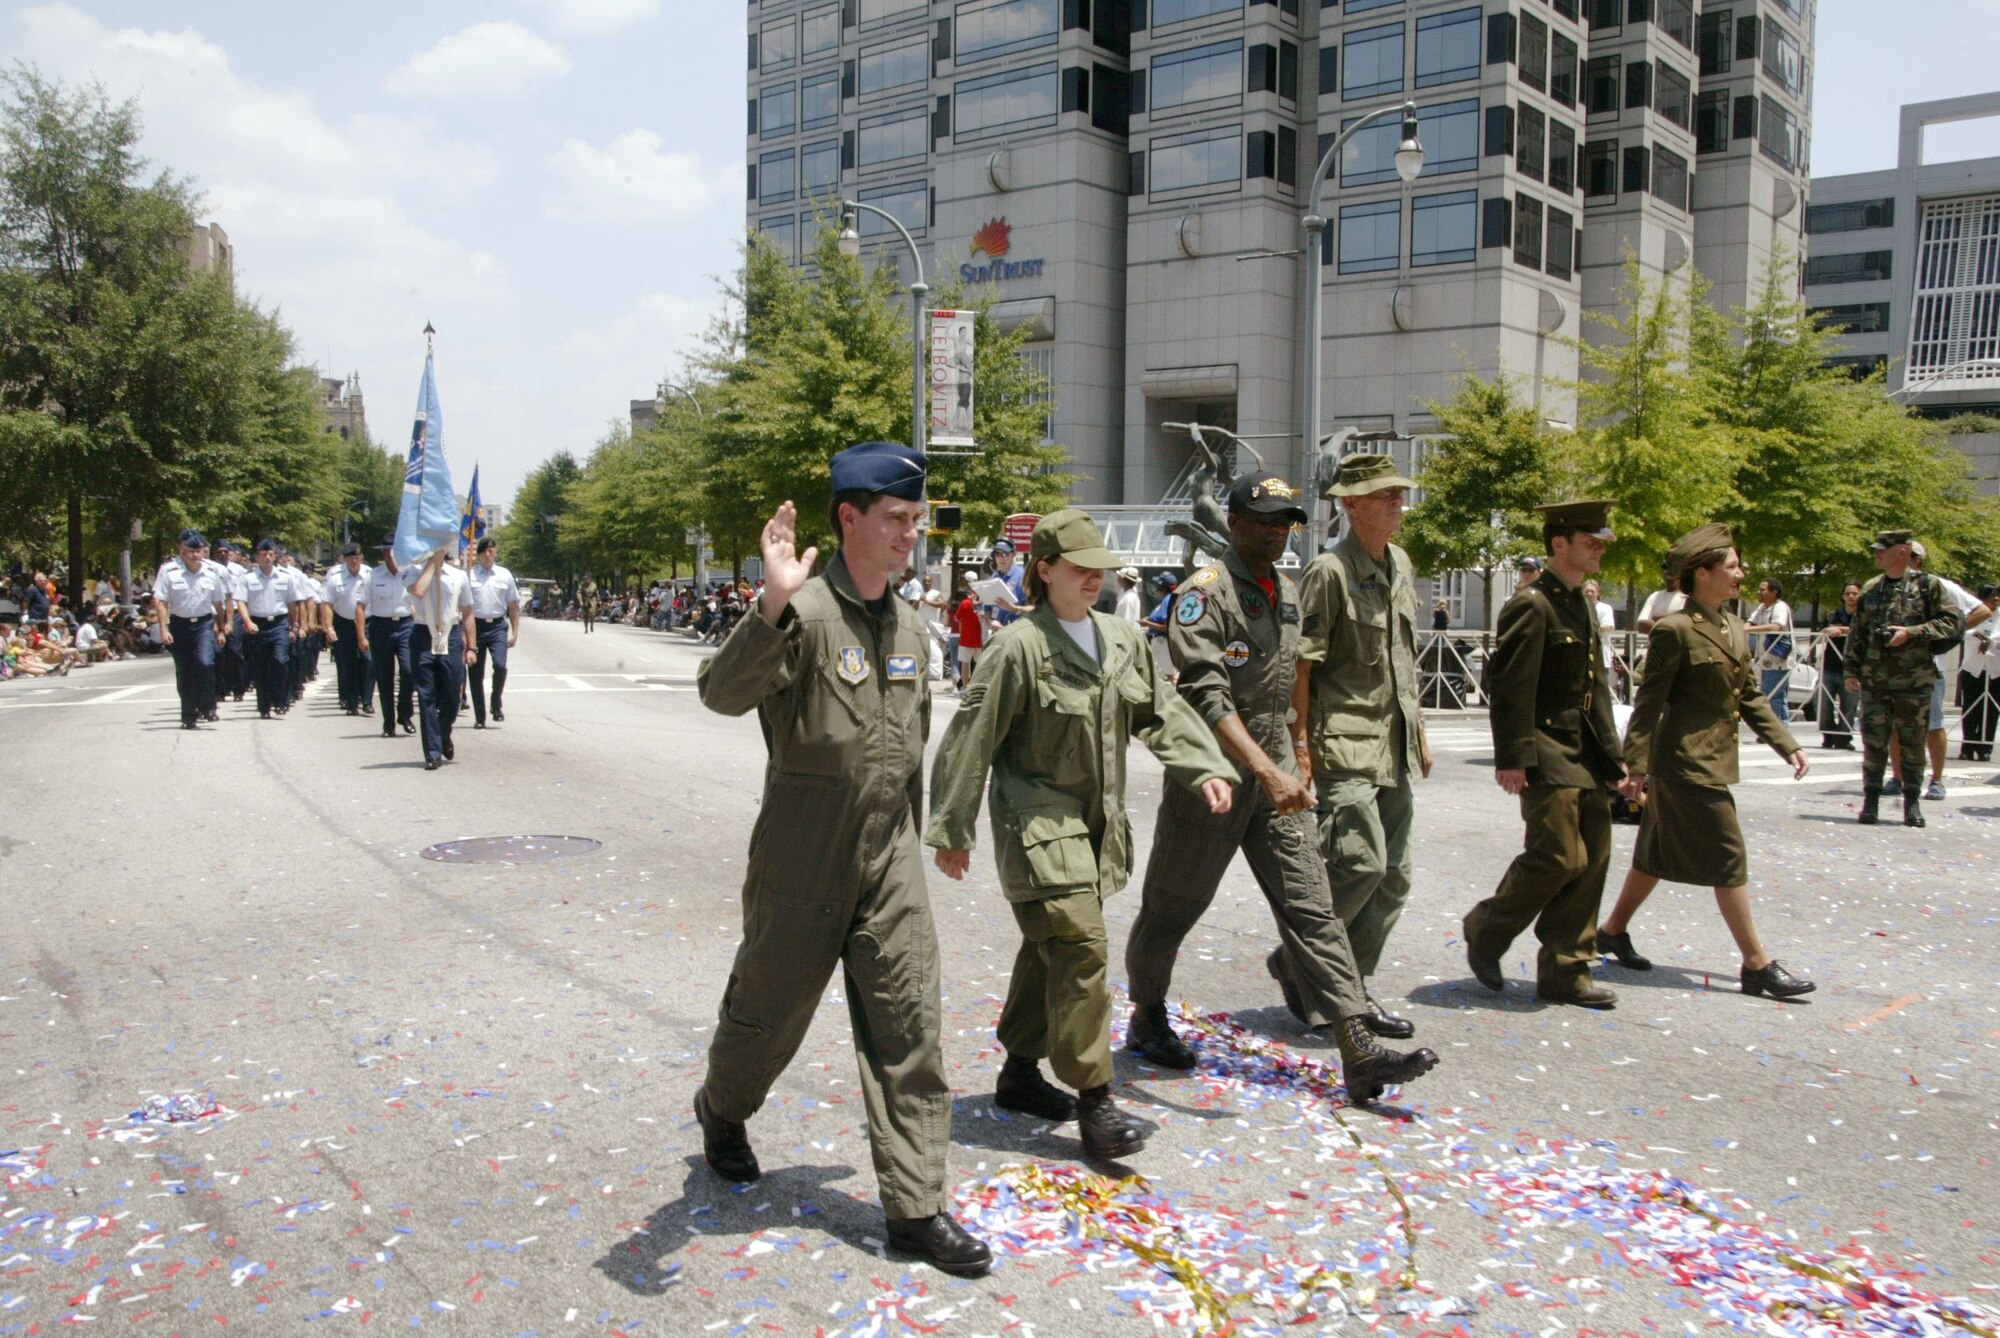 Personnel from Dobbins Air Reserve Base, Ga. including the 94th Airlift Wing and the 22nd Air Force Headquarters, along with various organizations from Warner Robins Air Force Base, Ga., dressed in period uniforms for the July 4 "Salute 2 America" parade in downtown Atlanta. They were followed by members in dress blues, flight suits, and battle dress uniforms, making up three flights representing the Air Force.(U.S. Air Force photo/Don Peek)